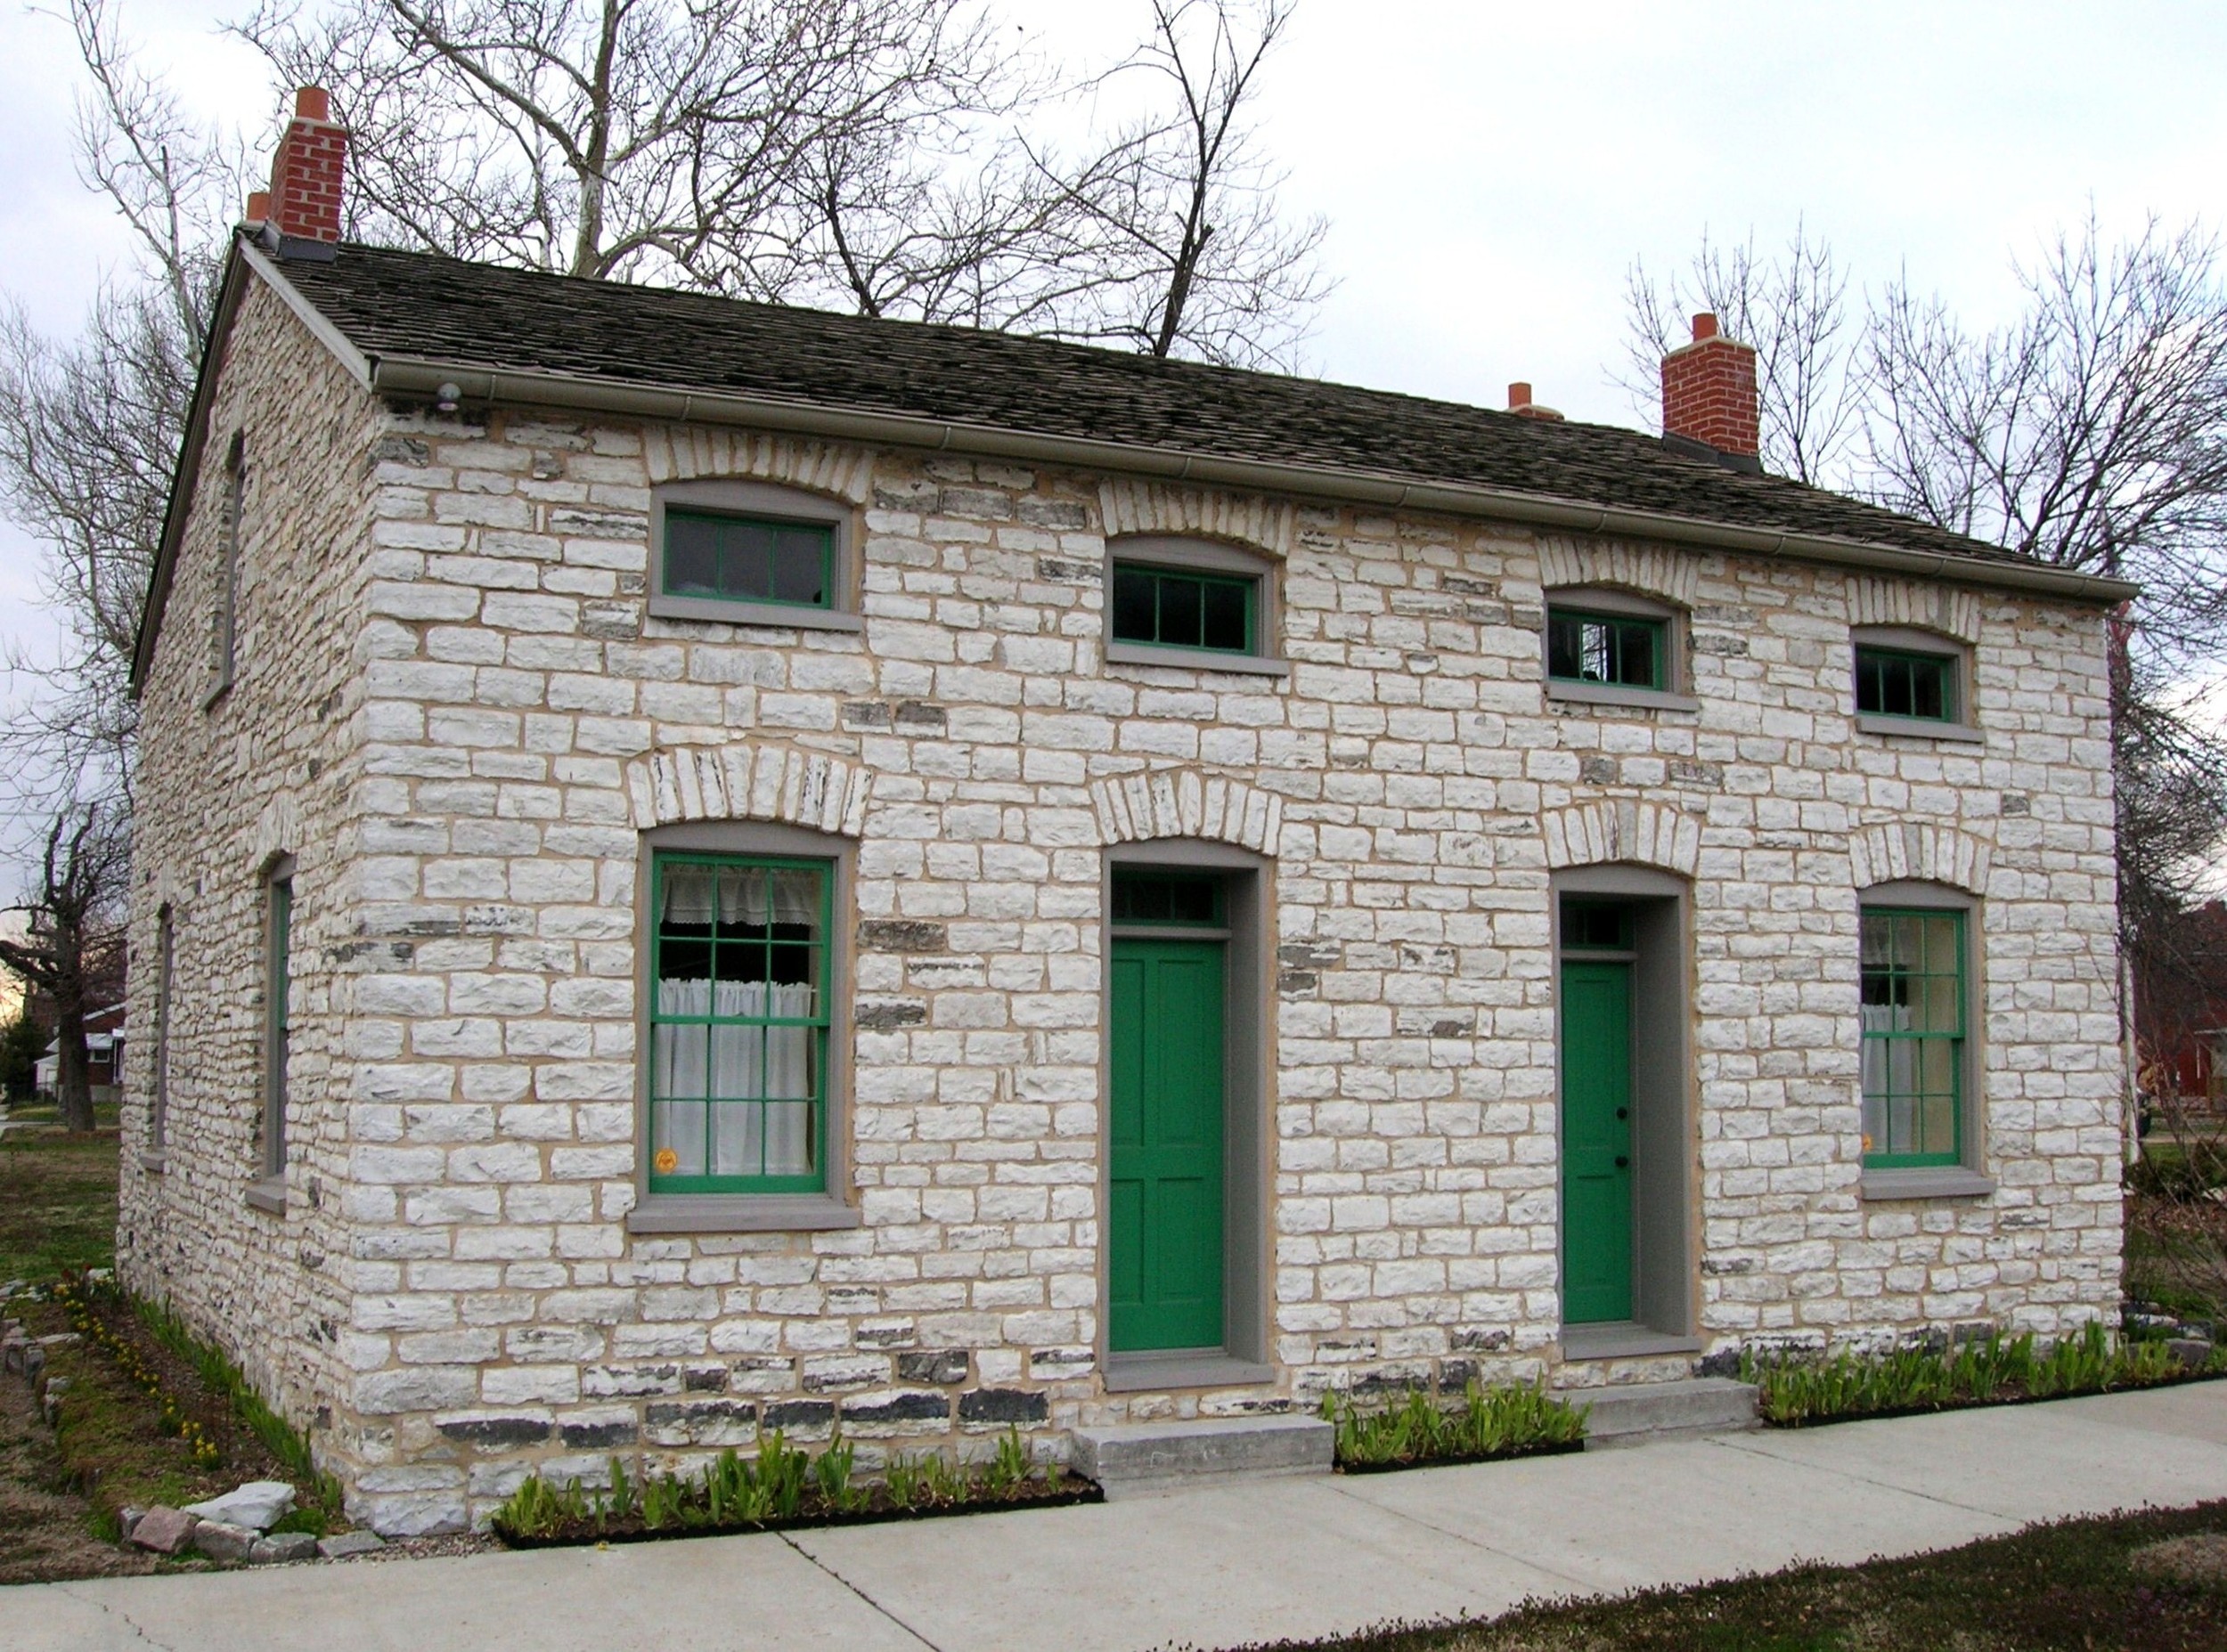 1850's Stone House in South Saint Louis Square Park - Carondelet, MO - Stone Works - Lee Lindsey